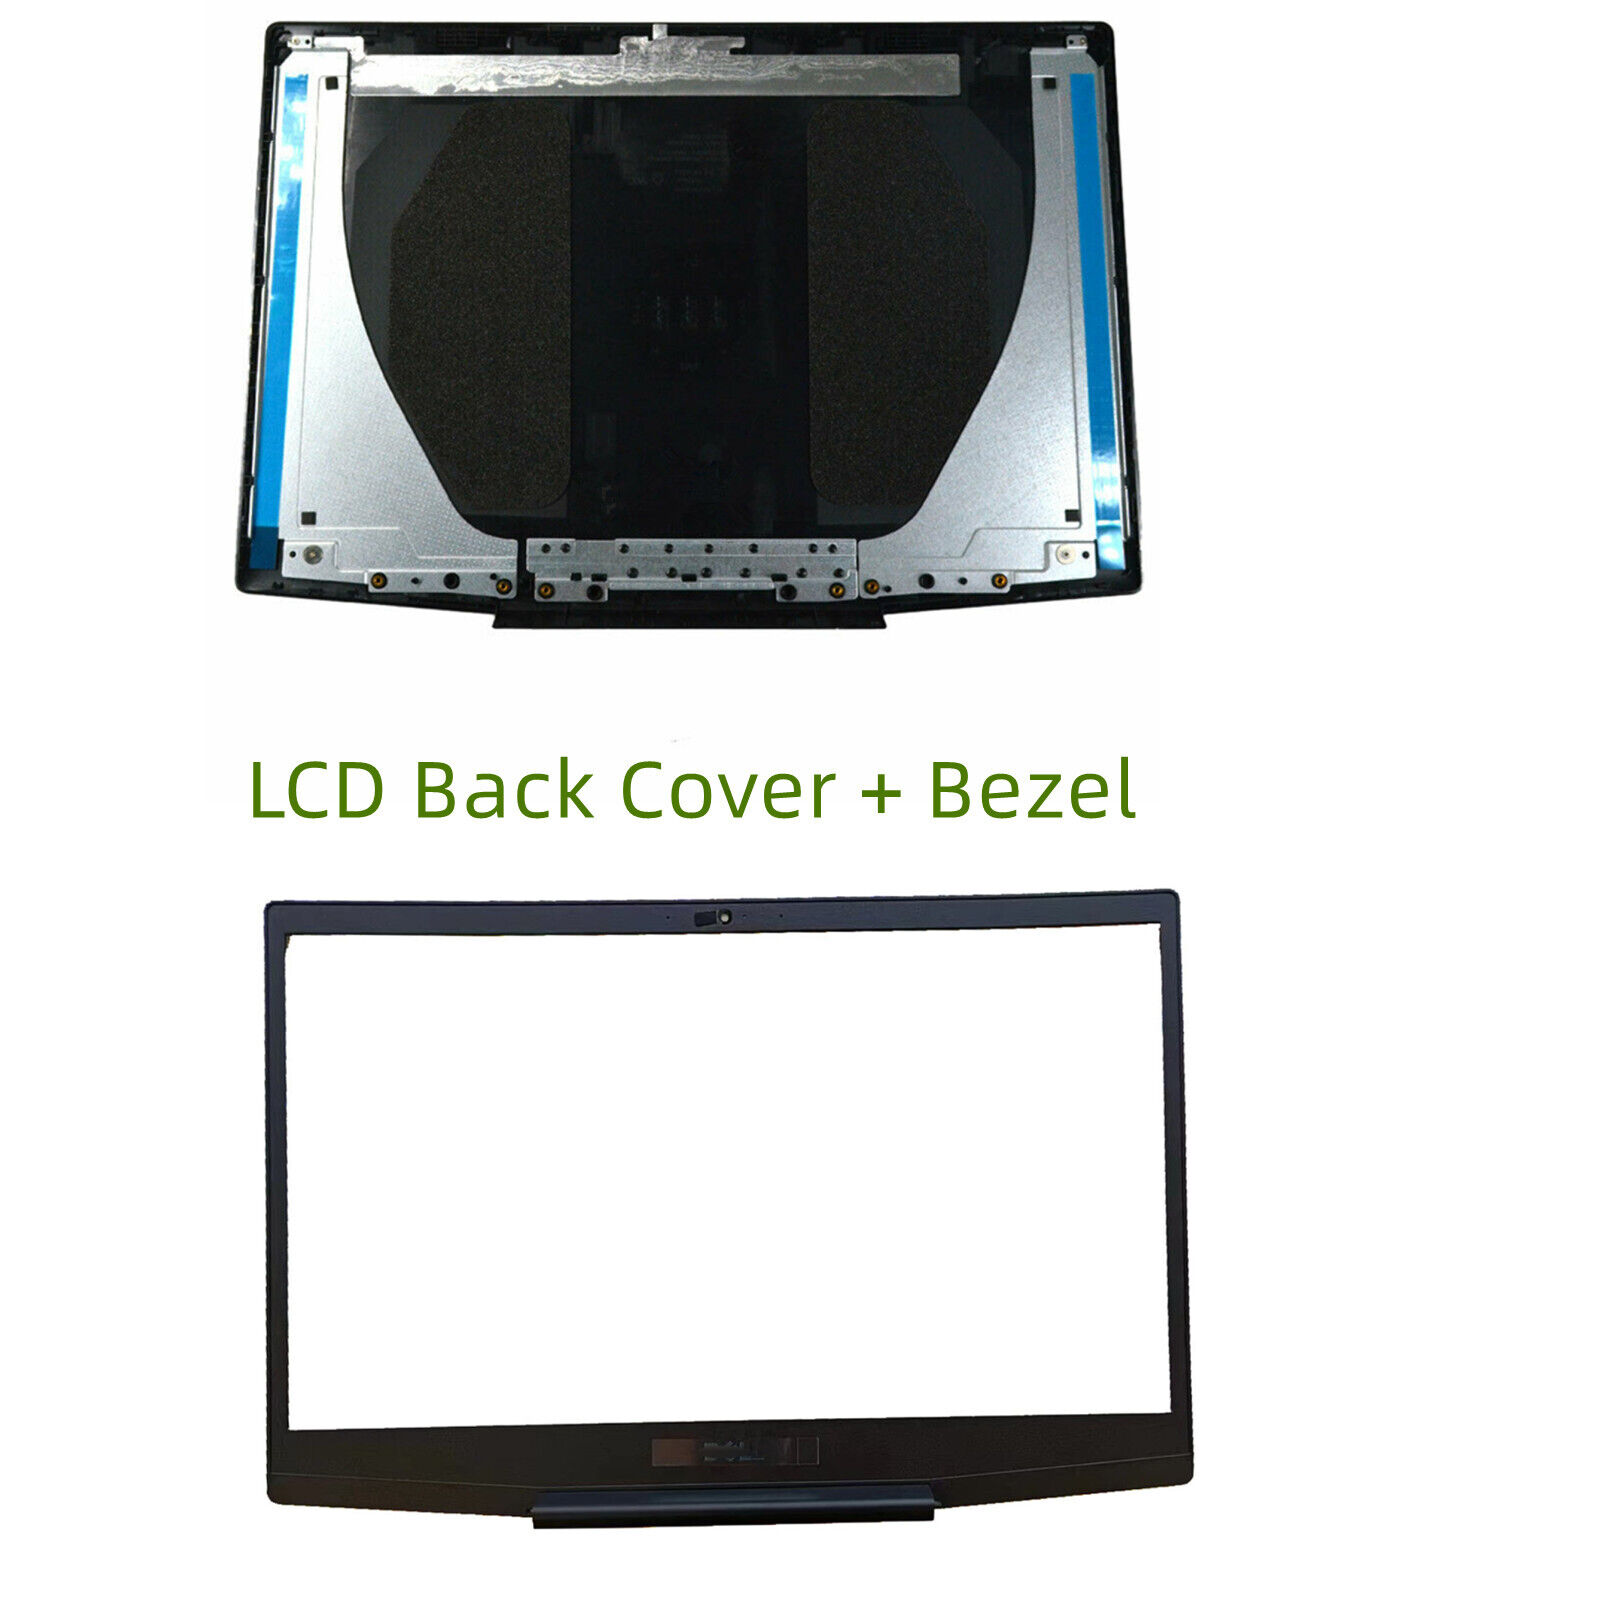 LCD Back Cover Blue Logo 747KP LCD Front Bezel For Dell G3 15 3590 0747KP 07MD2F